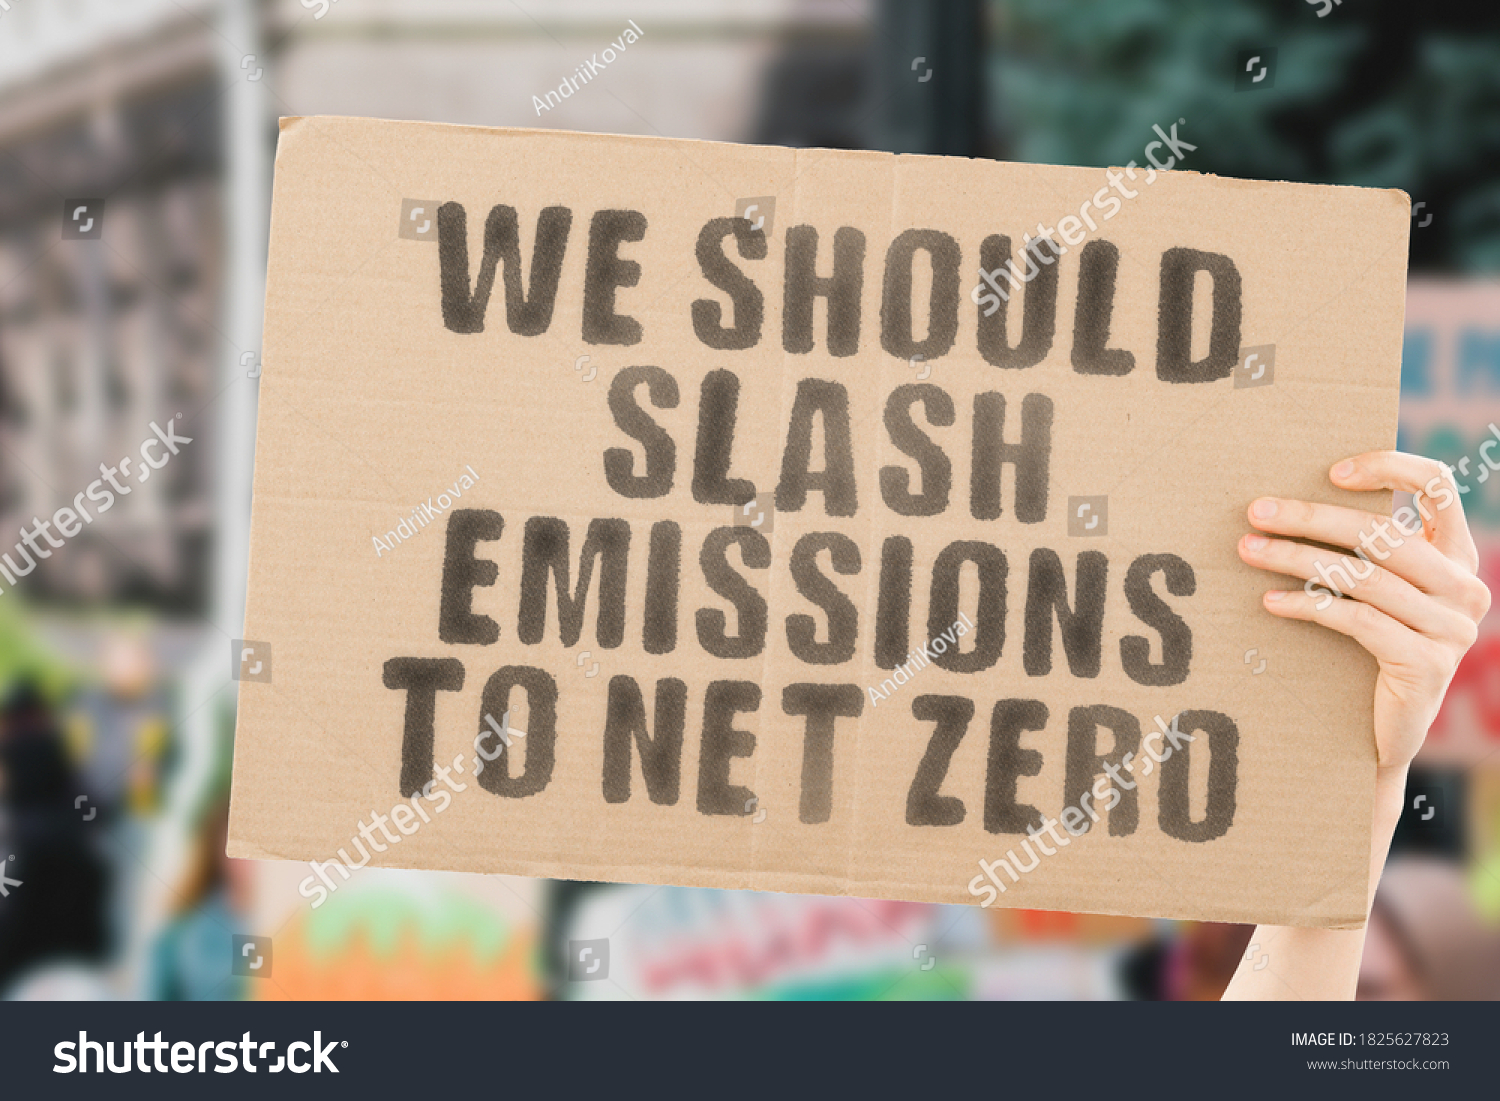 The phrase " We should slash emissions to net zero " on a banner in men's hand with blurred background. Ecology. Industry. Technology. Pollution. CO2. Global warming. Decrease #1825627823